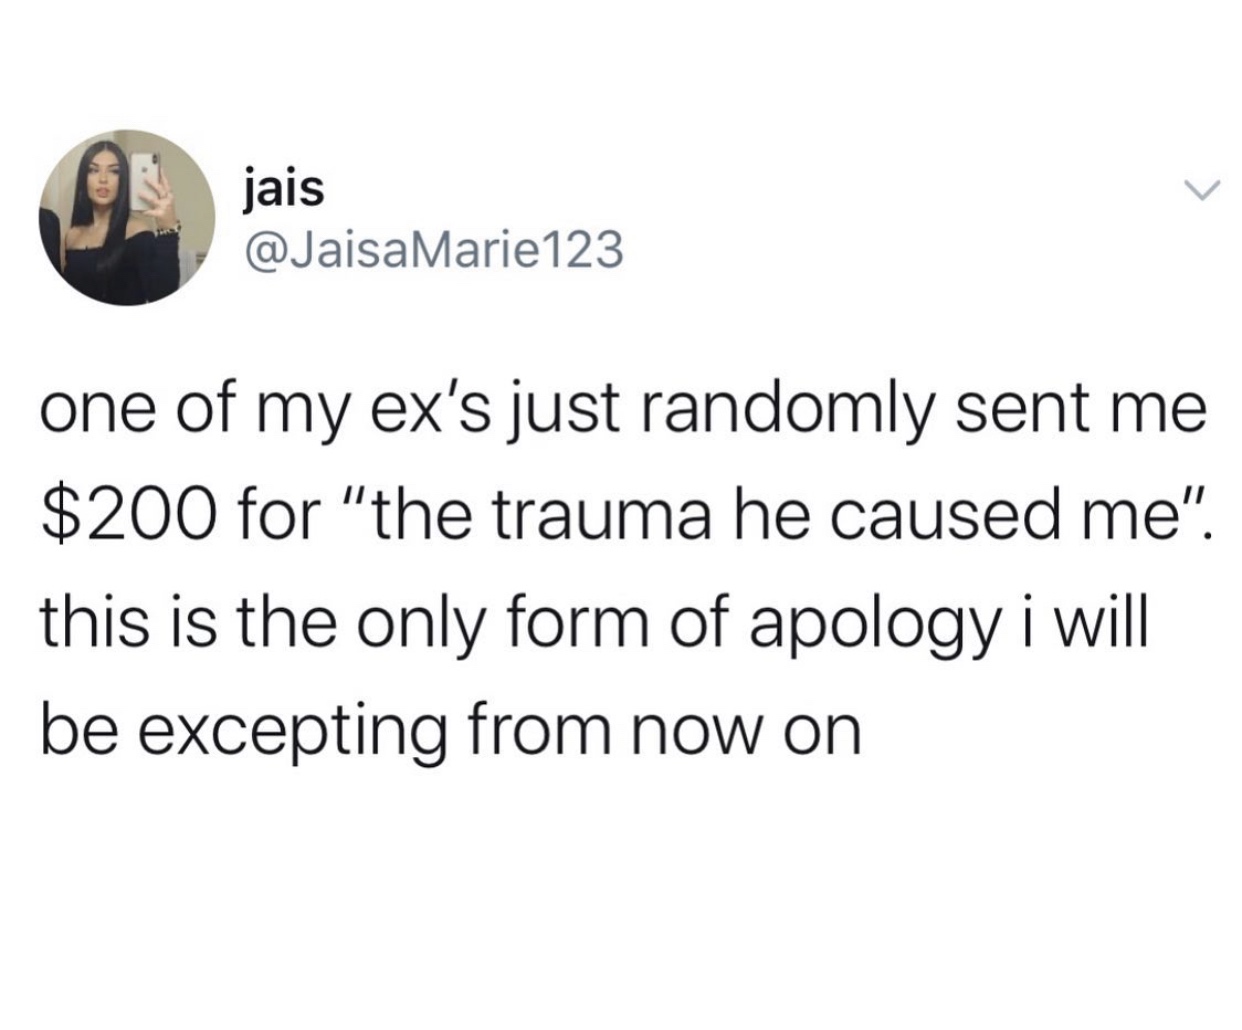 powerhouse of the cell meme - jais Marie123 one of my ex's just randomly sent me $200 for "the trauma he caused me". this is the only form of apology i will be excepting from now on